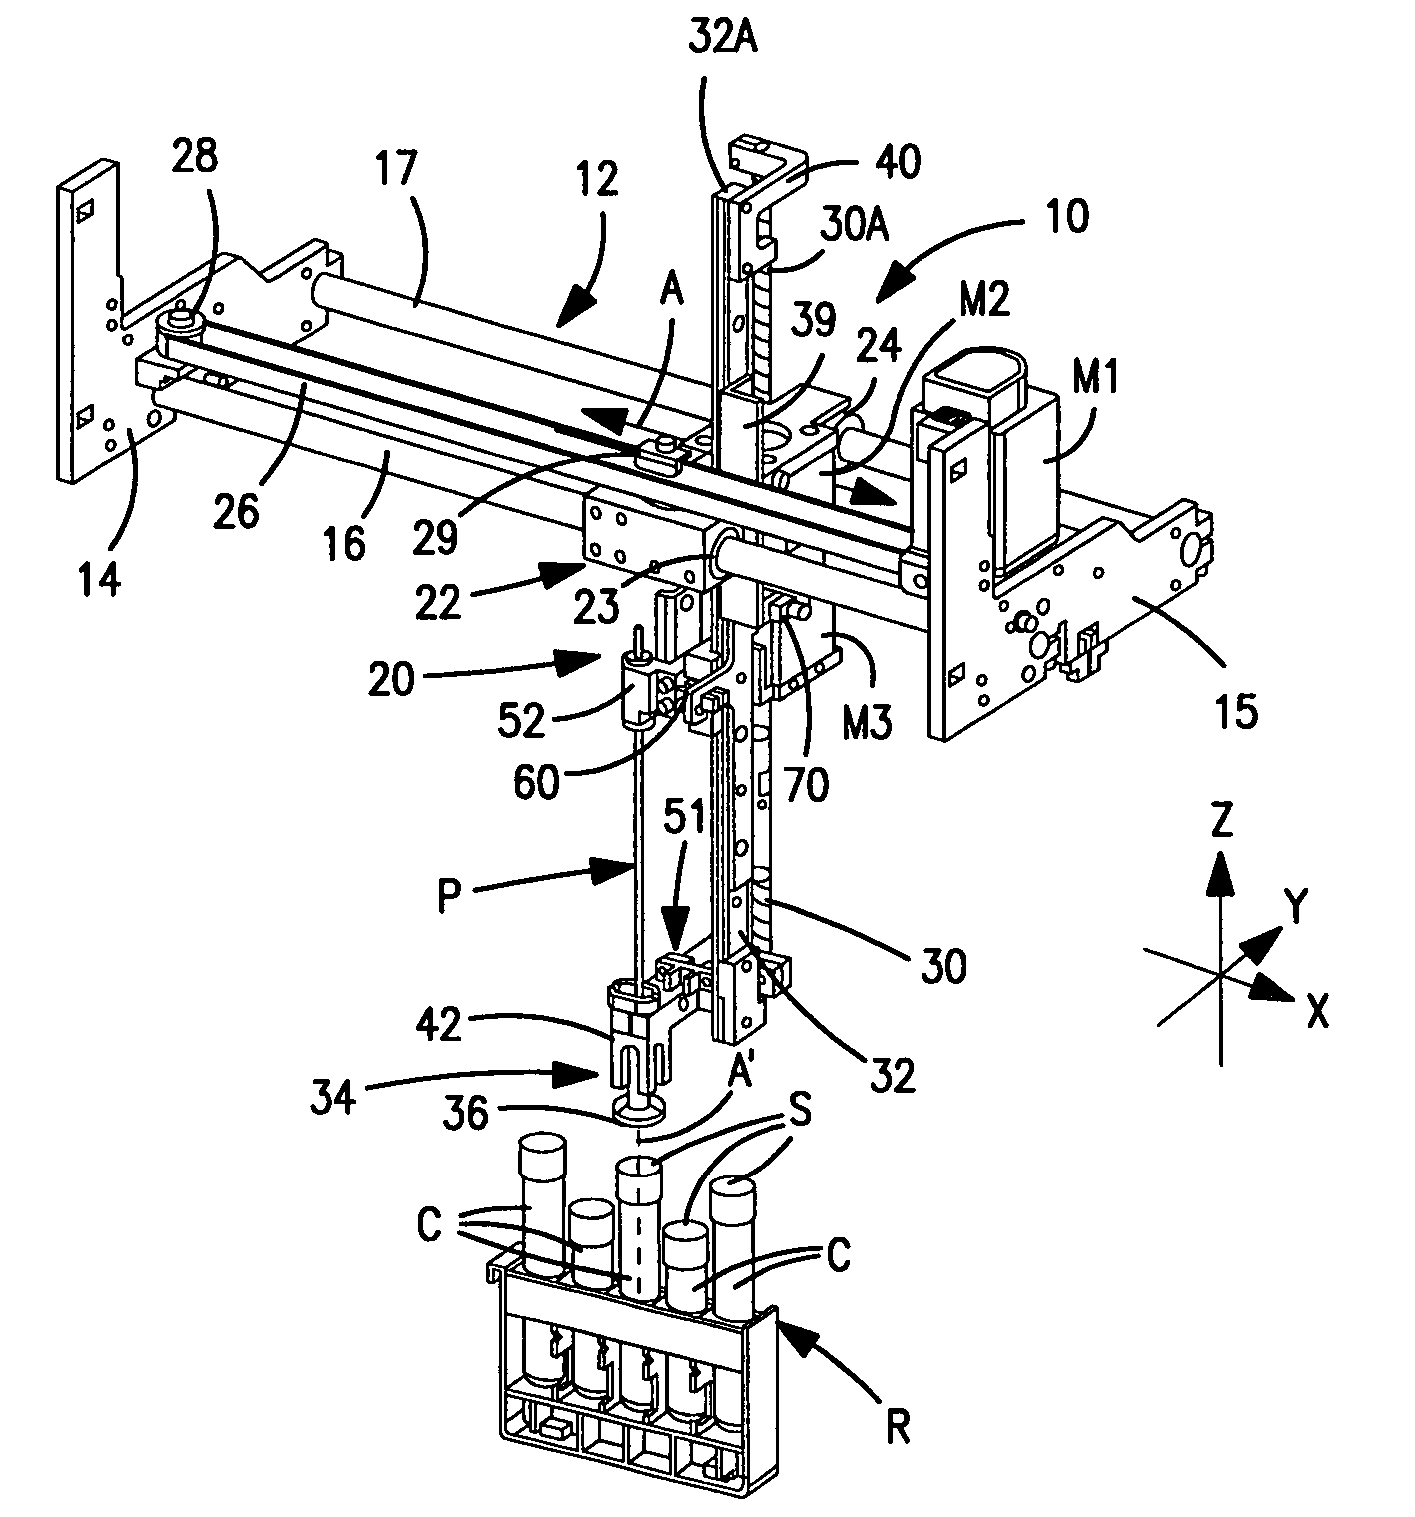 Apparatus for aspirating liquids from sealed containers